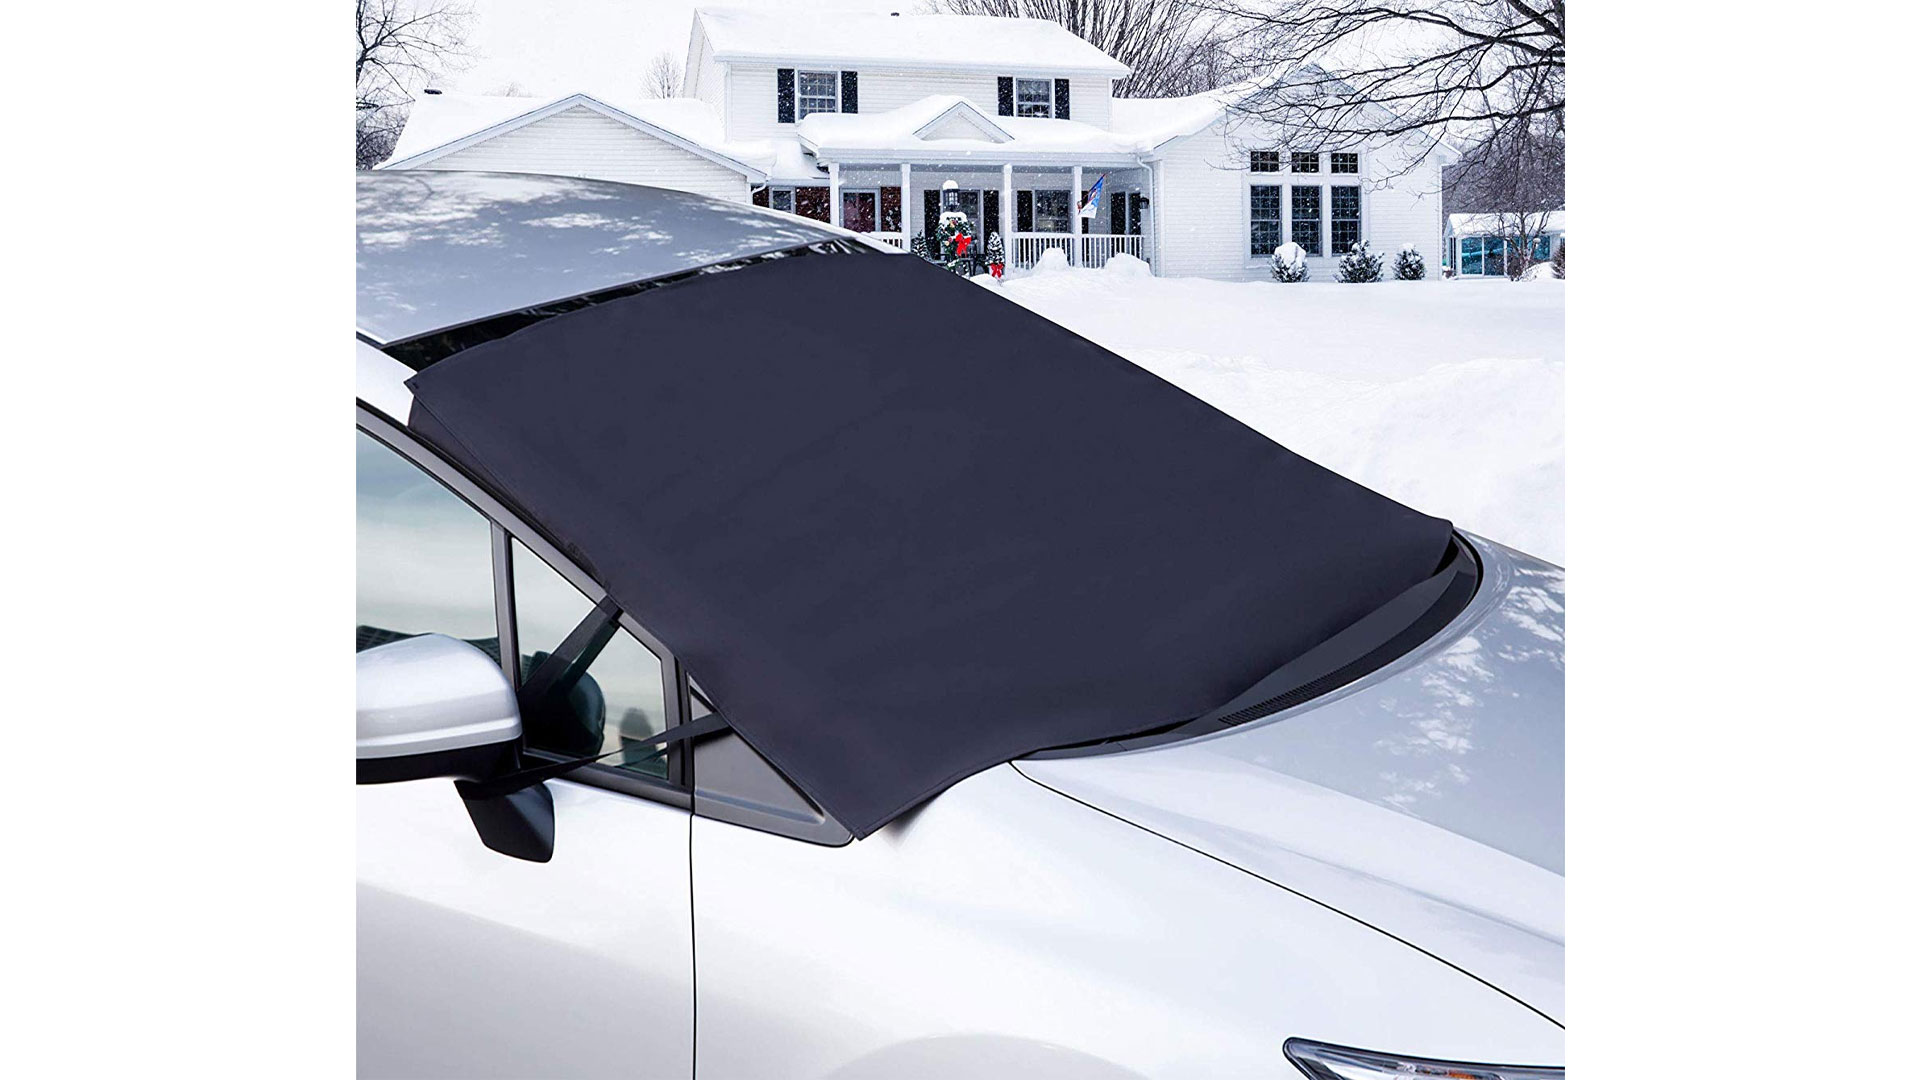 Car Windshield Snow Cover Winter Ice//Frost// Rain Sun Shade Weatherproof Guard Protector Hood with Reflective Warming Straps /& Two Mirror Covers for All Seasons /& Weather